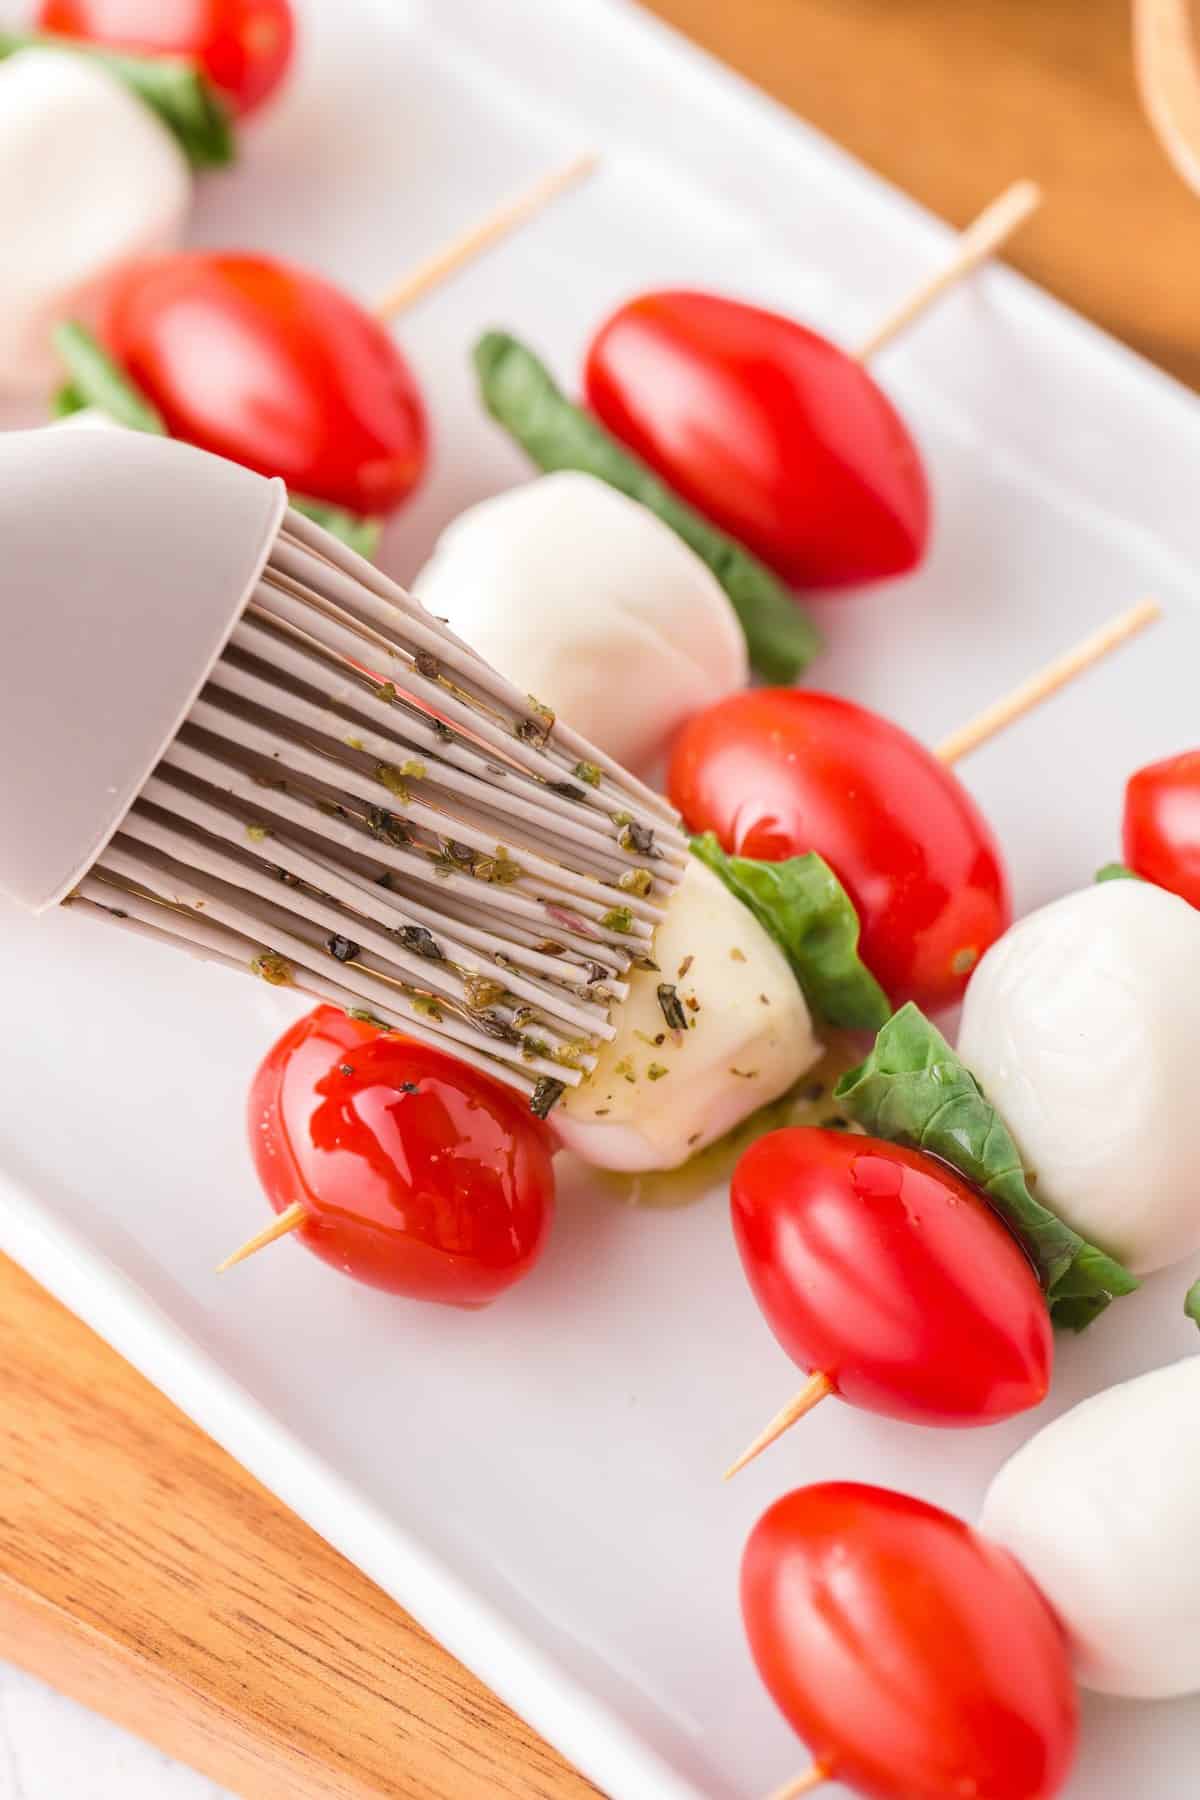 Brush the olive oil mixture over the top of the skewers.